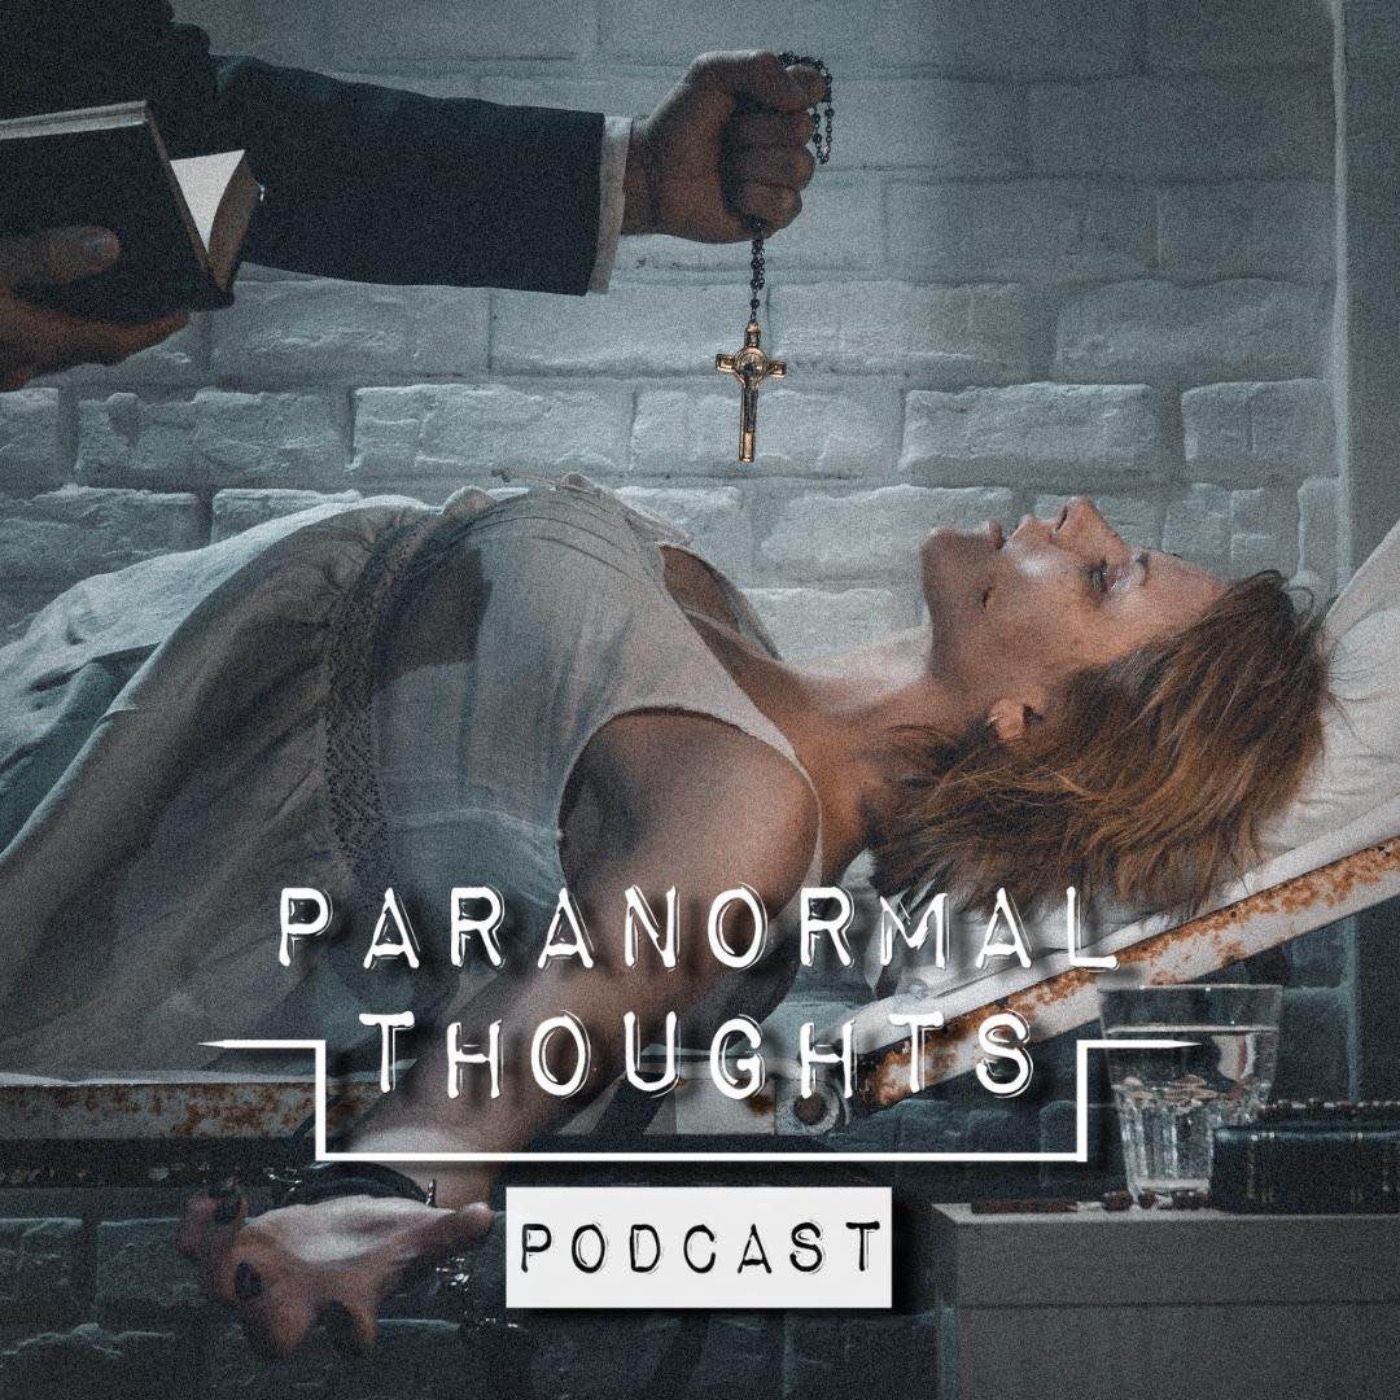 Interview with a Religious Demonologist Podcast